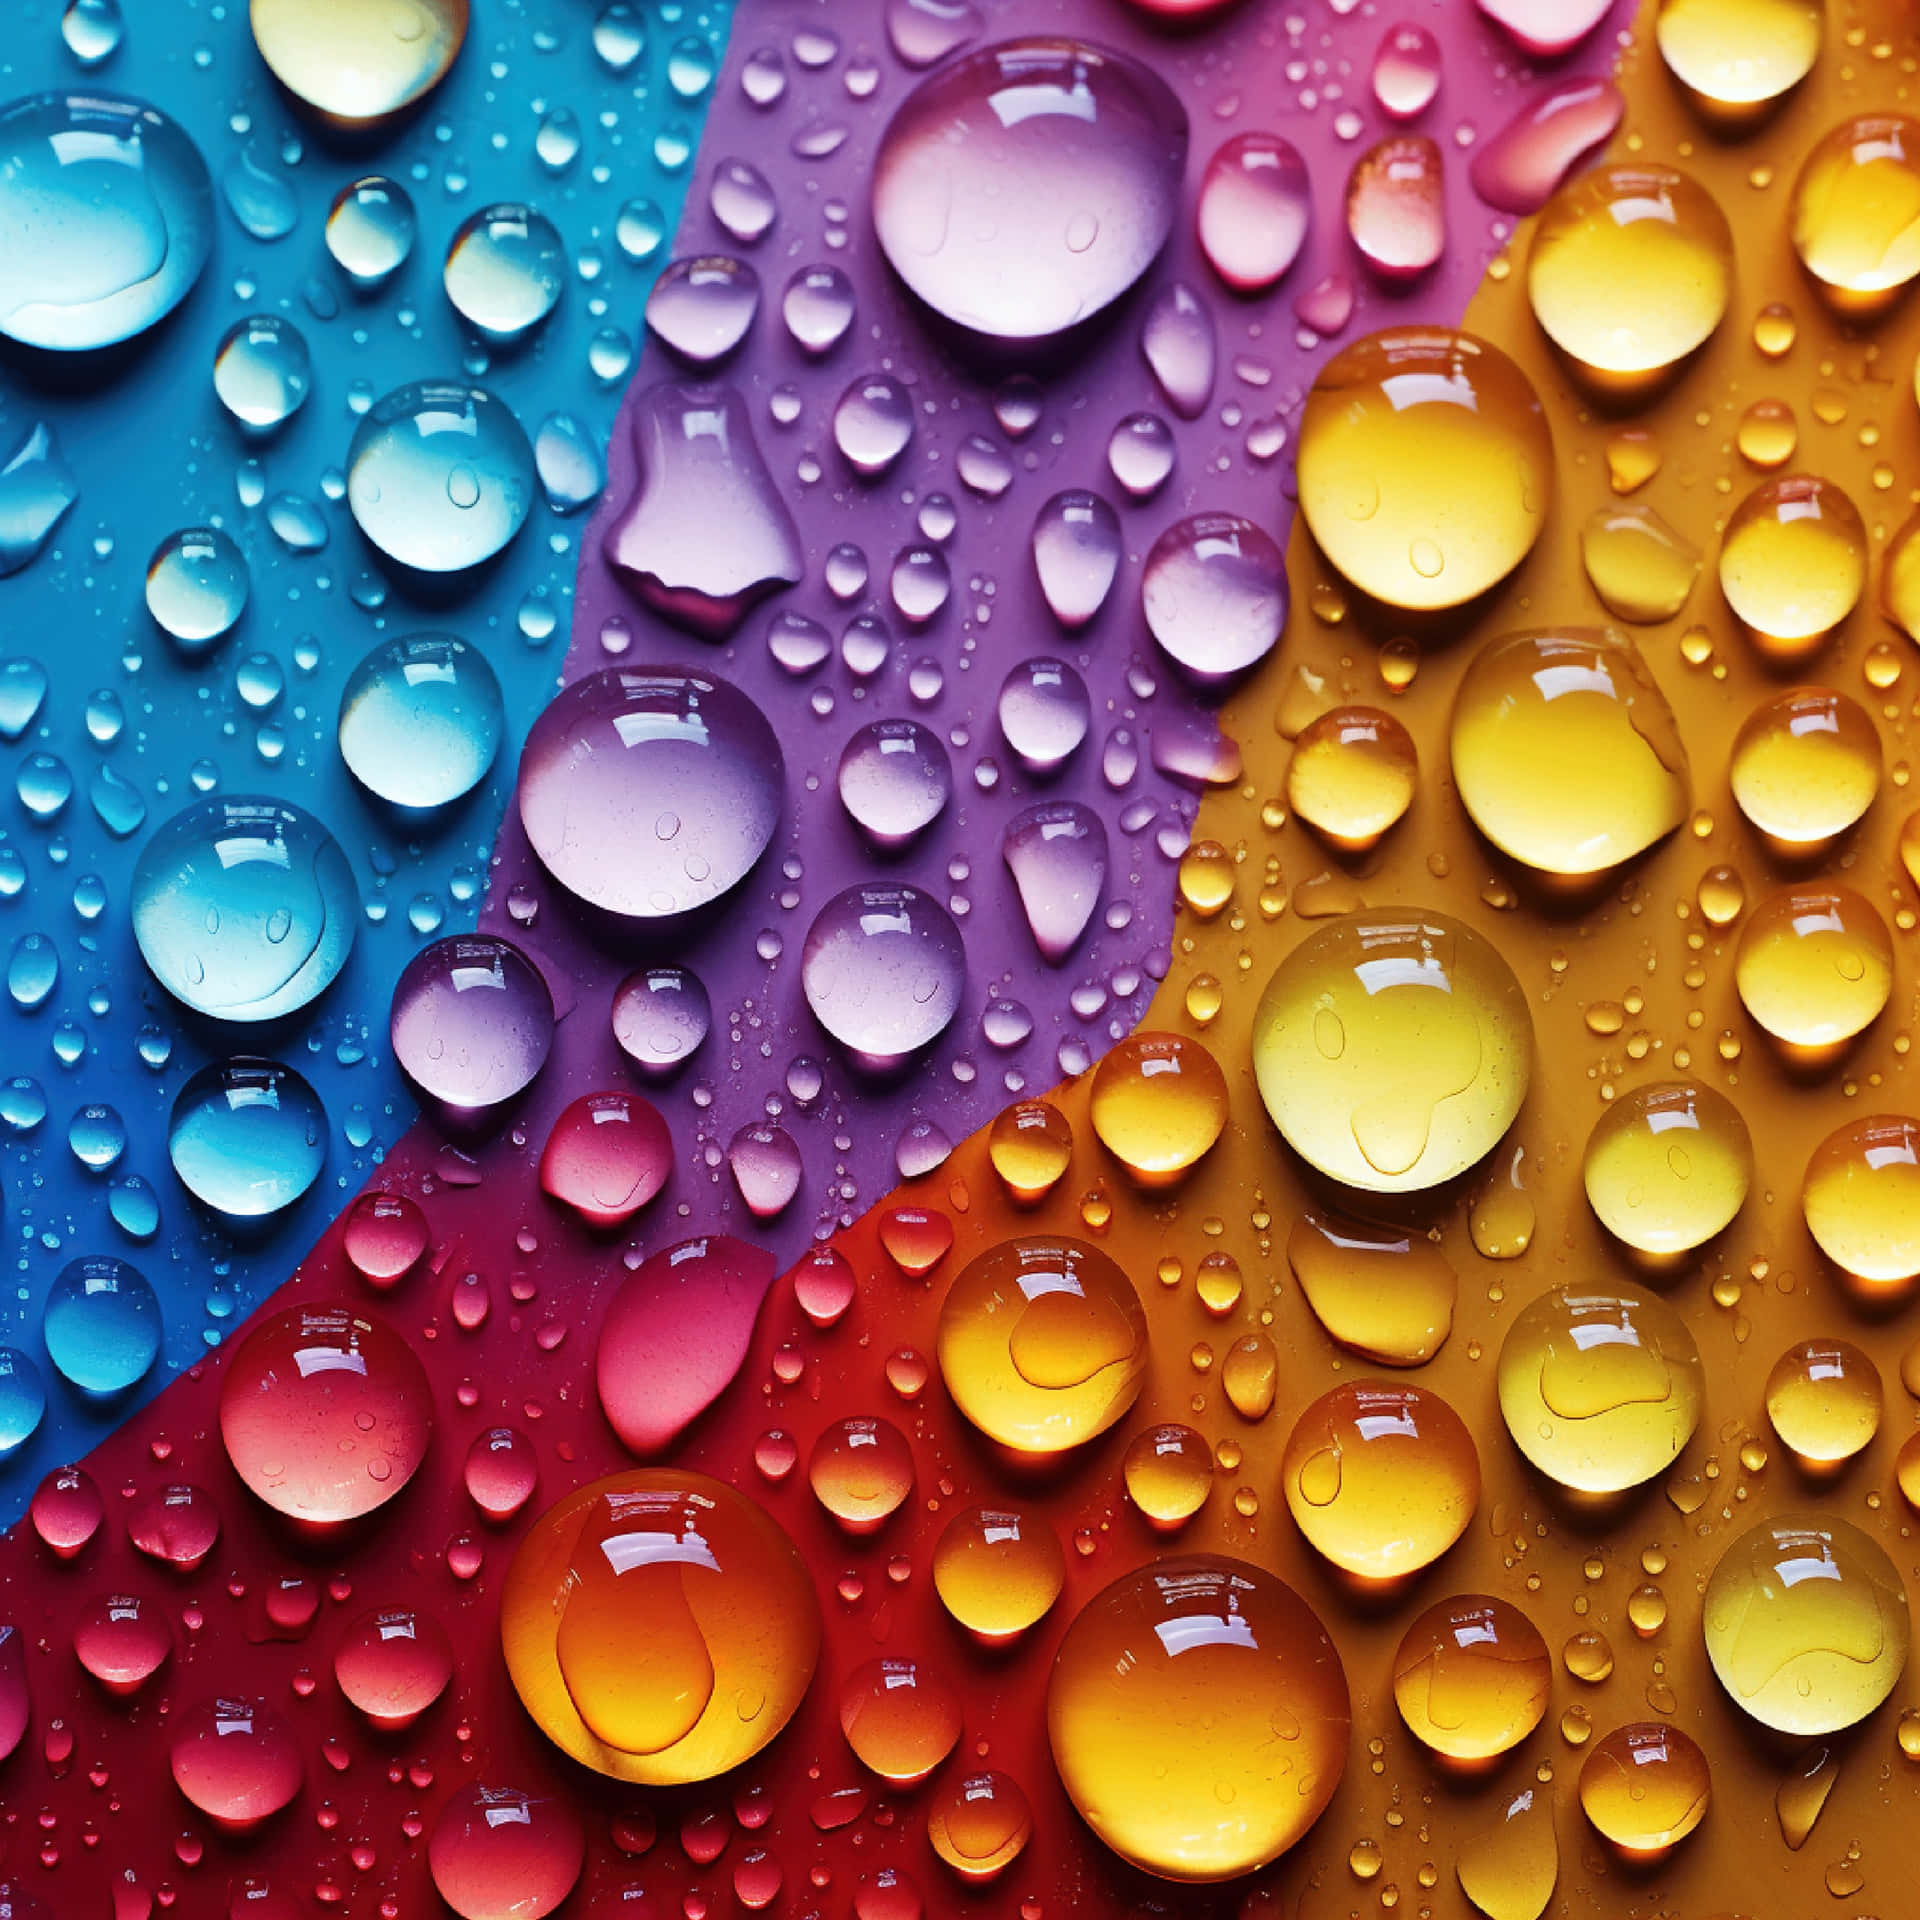 Colorful Water Droplets Texture Wallpaper